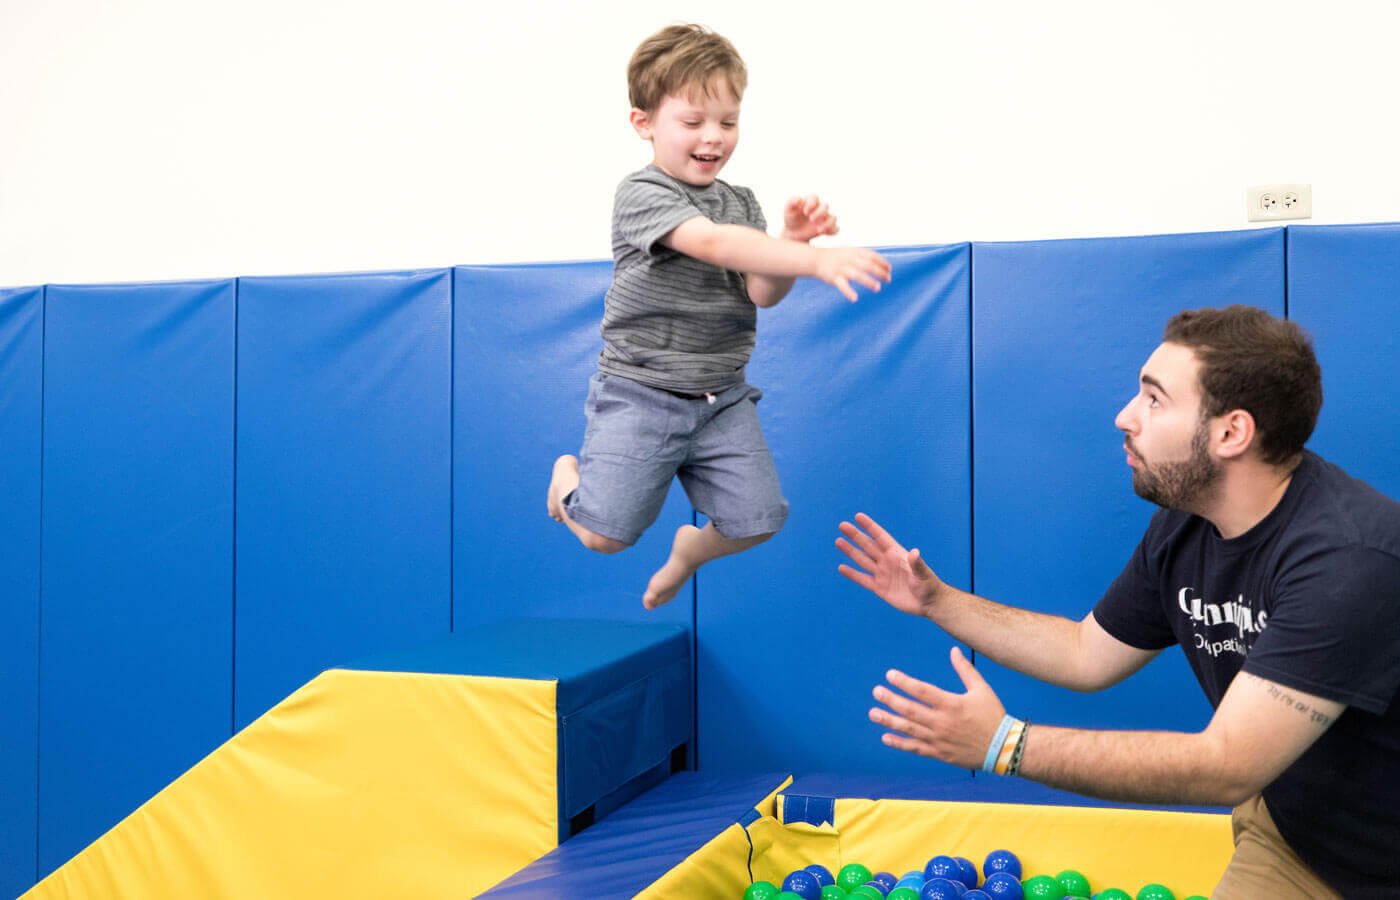 Child jumping in ball pit